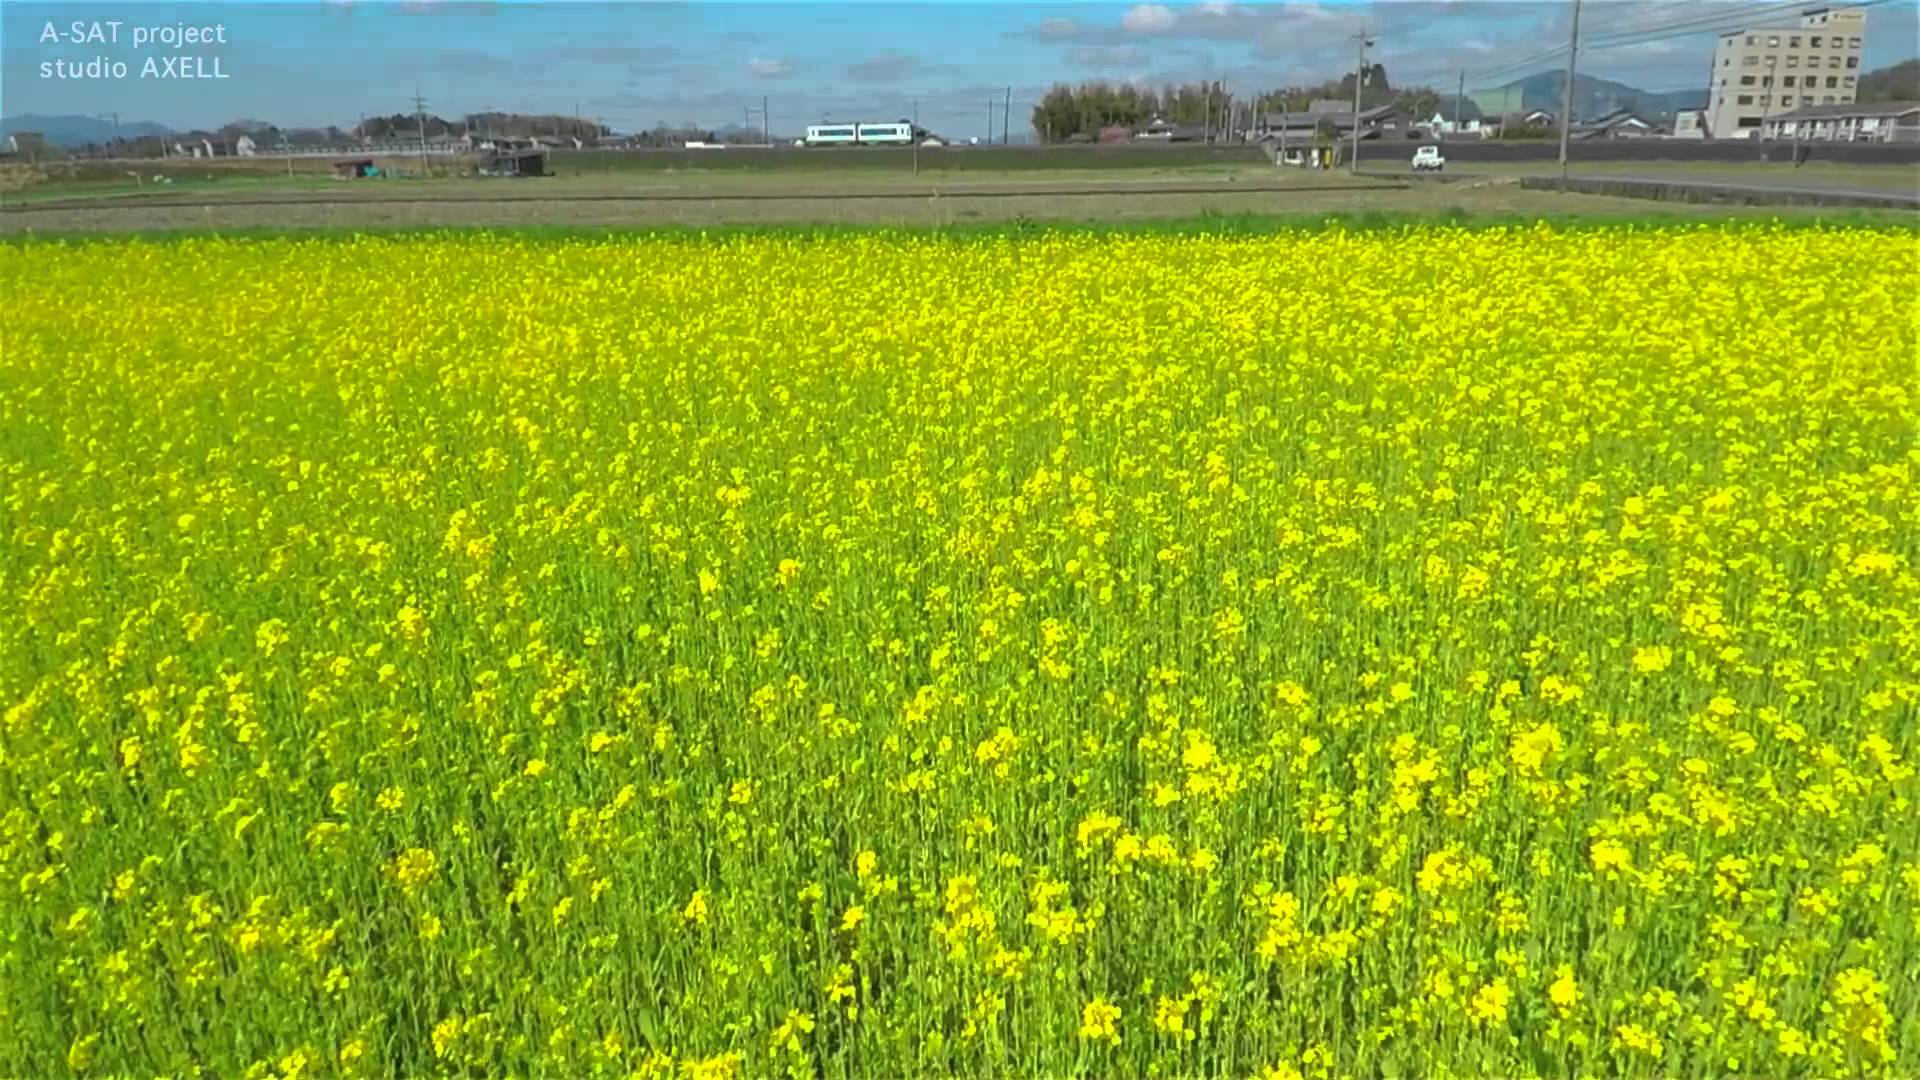 Flying over Field Mustard in Spring - YouTube